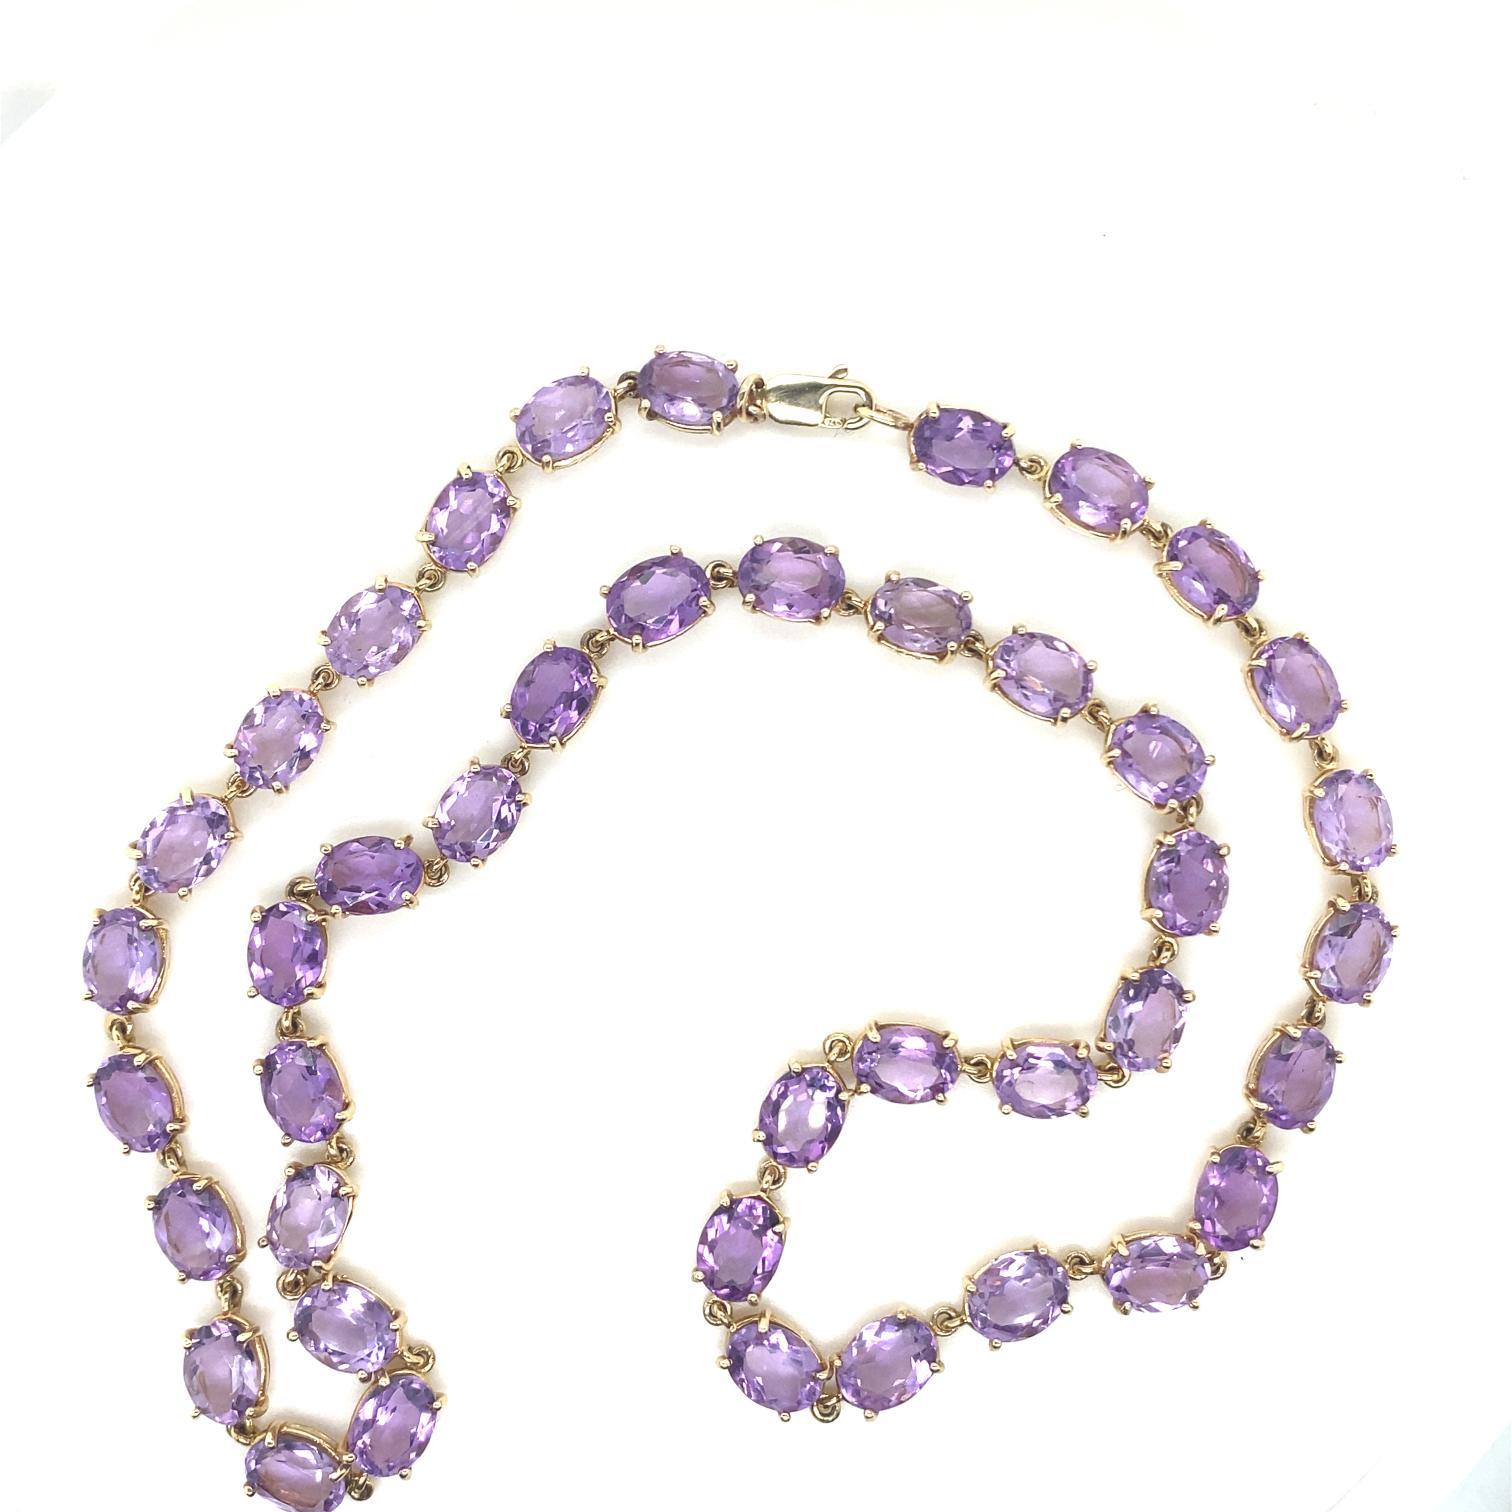 A vintage amethyst riviere necklace in 9 karat yellow gold, circa 1980.

This elegant and classic riviere necklace features 42 individually set oval cut amethysts for a total of 37 carats approximately. Each amethyst is mounted within a four claw